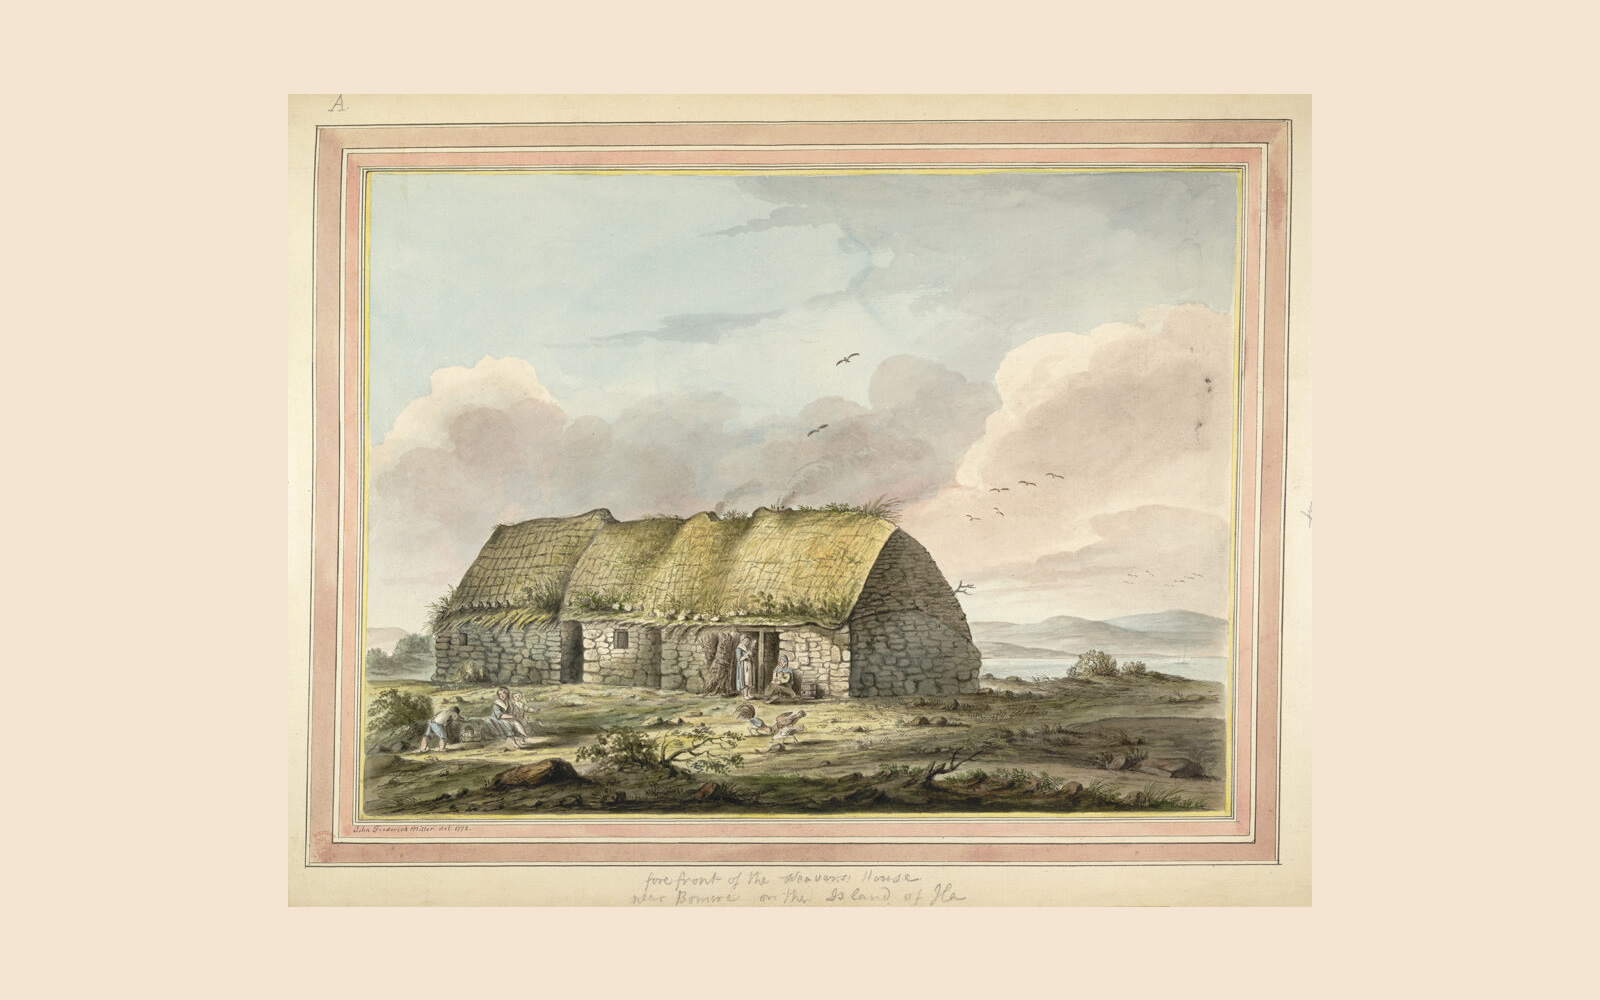 John Frederick Miller, 'Forefront of the Weavers House near Bomore on the Island of Ila' (British Library)